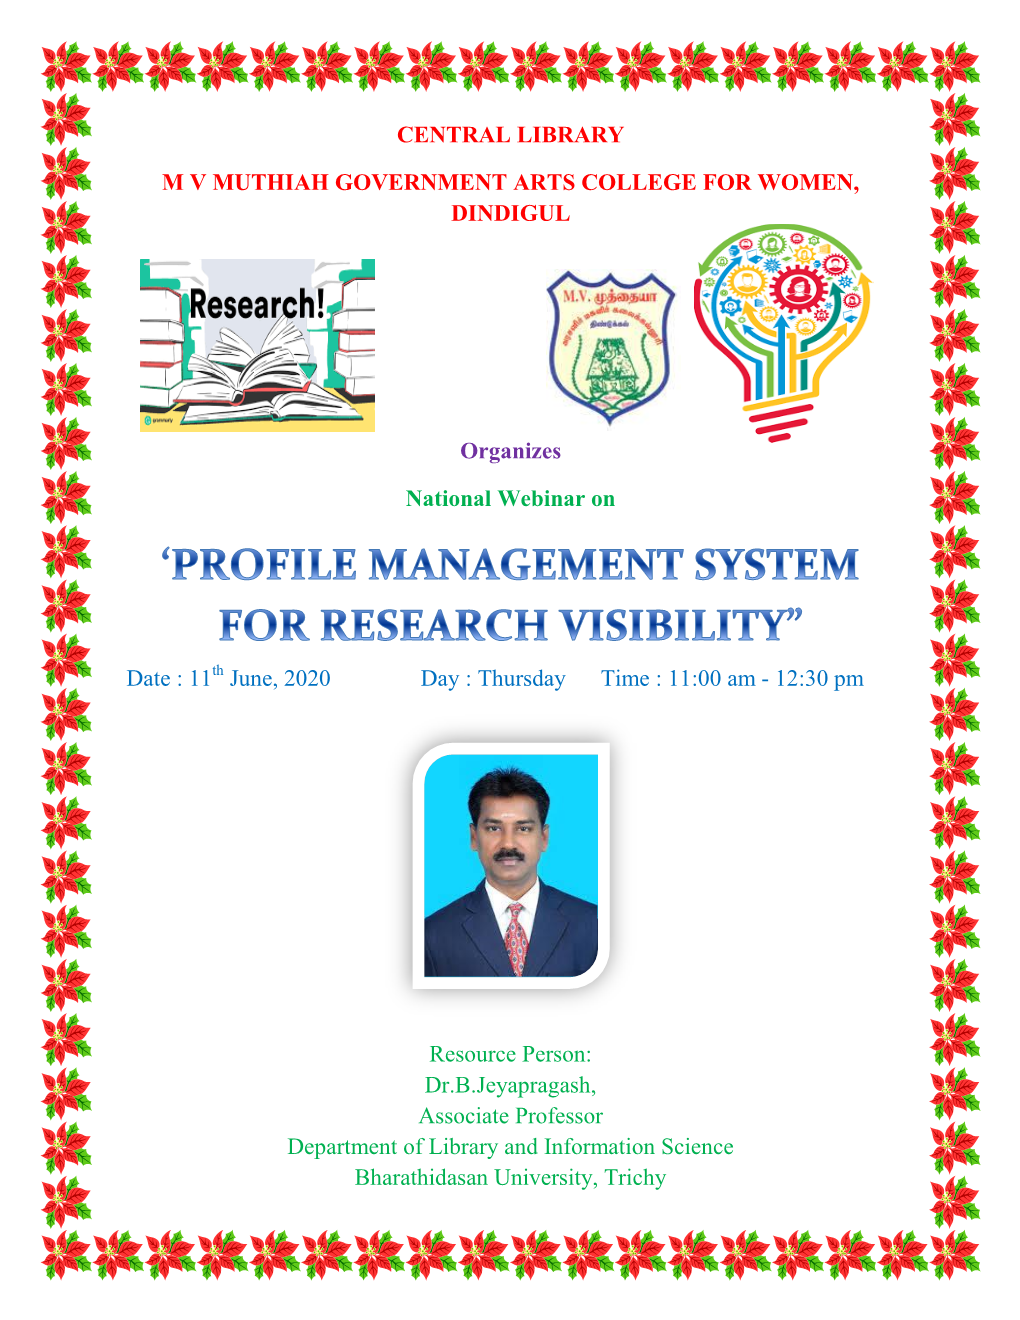 National Webinar on 'Profile Management System for Research